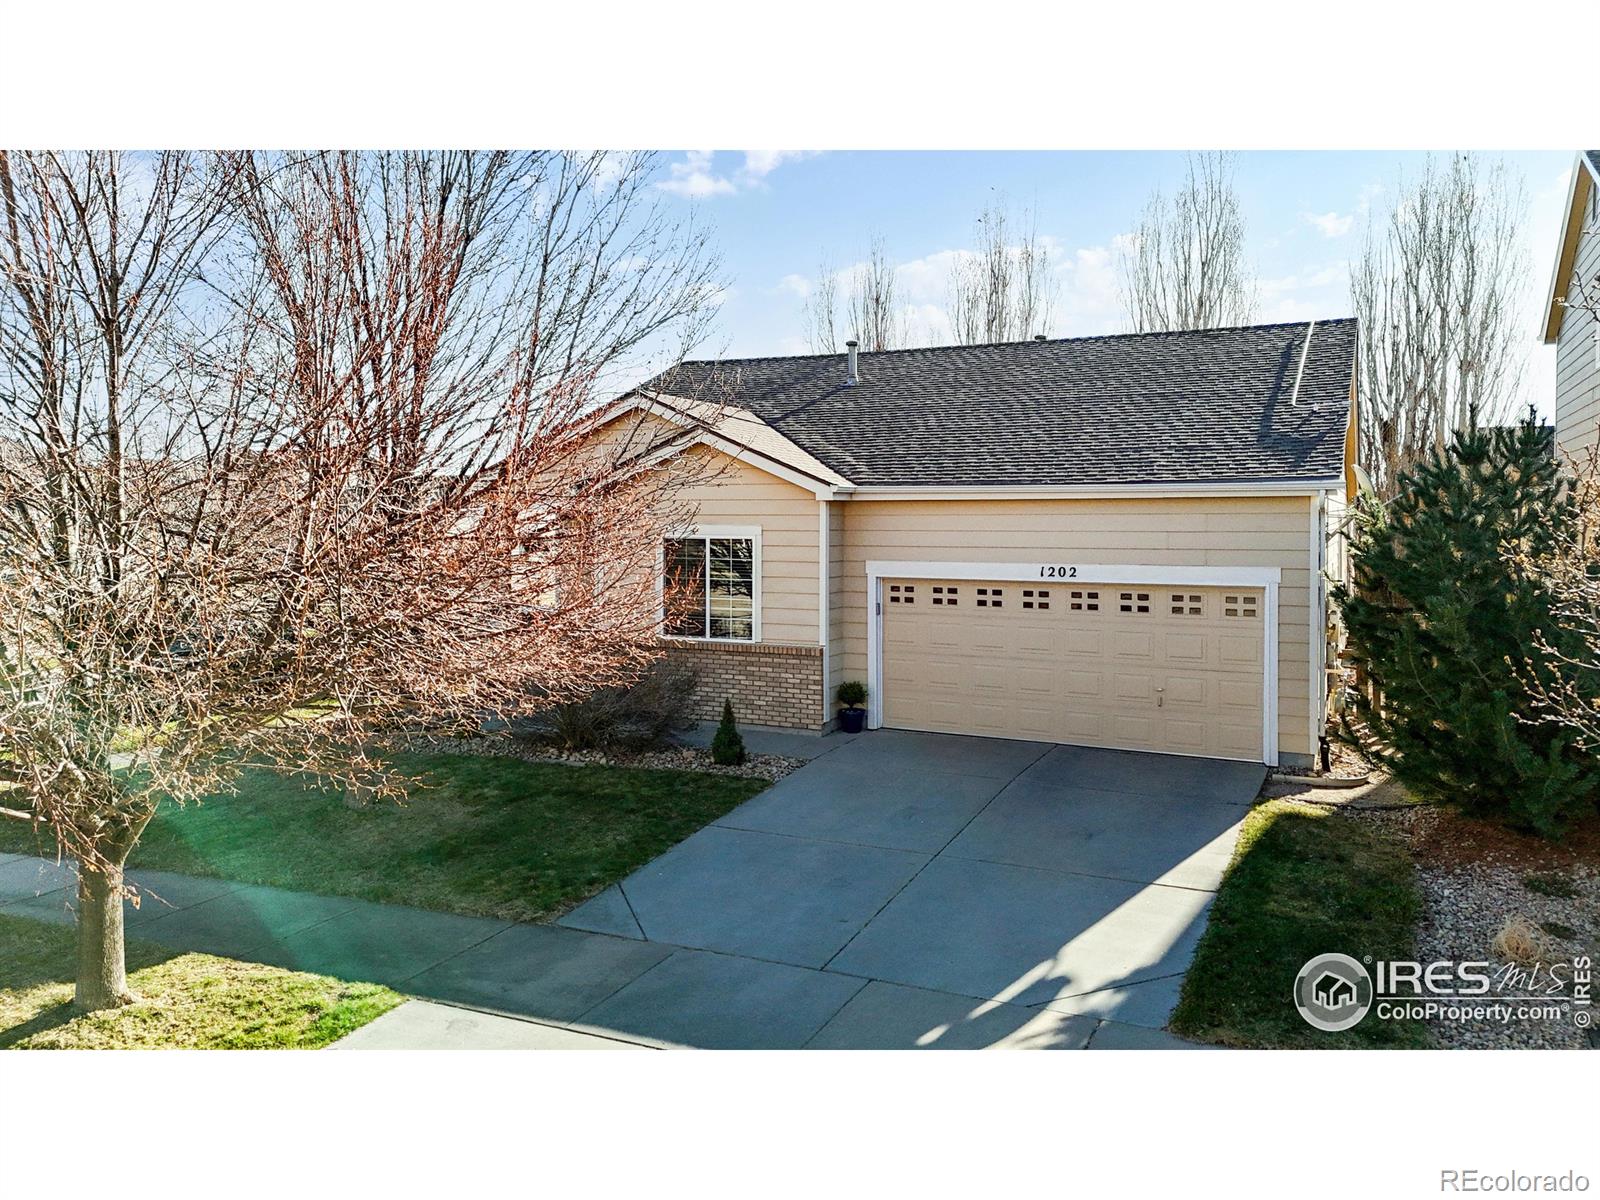 1202  103rd Avenue, greeley MLS: 4567891006656 Beds: 3 Baths: 2 Price: $440,000